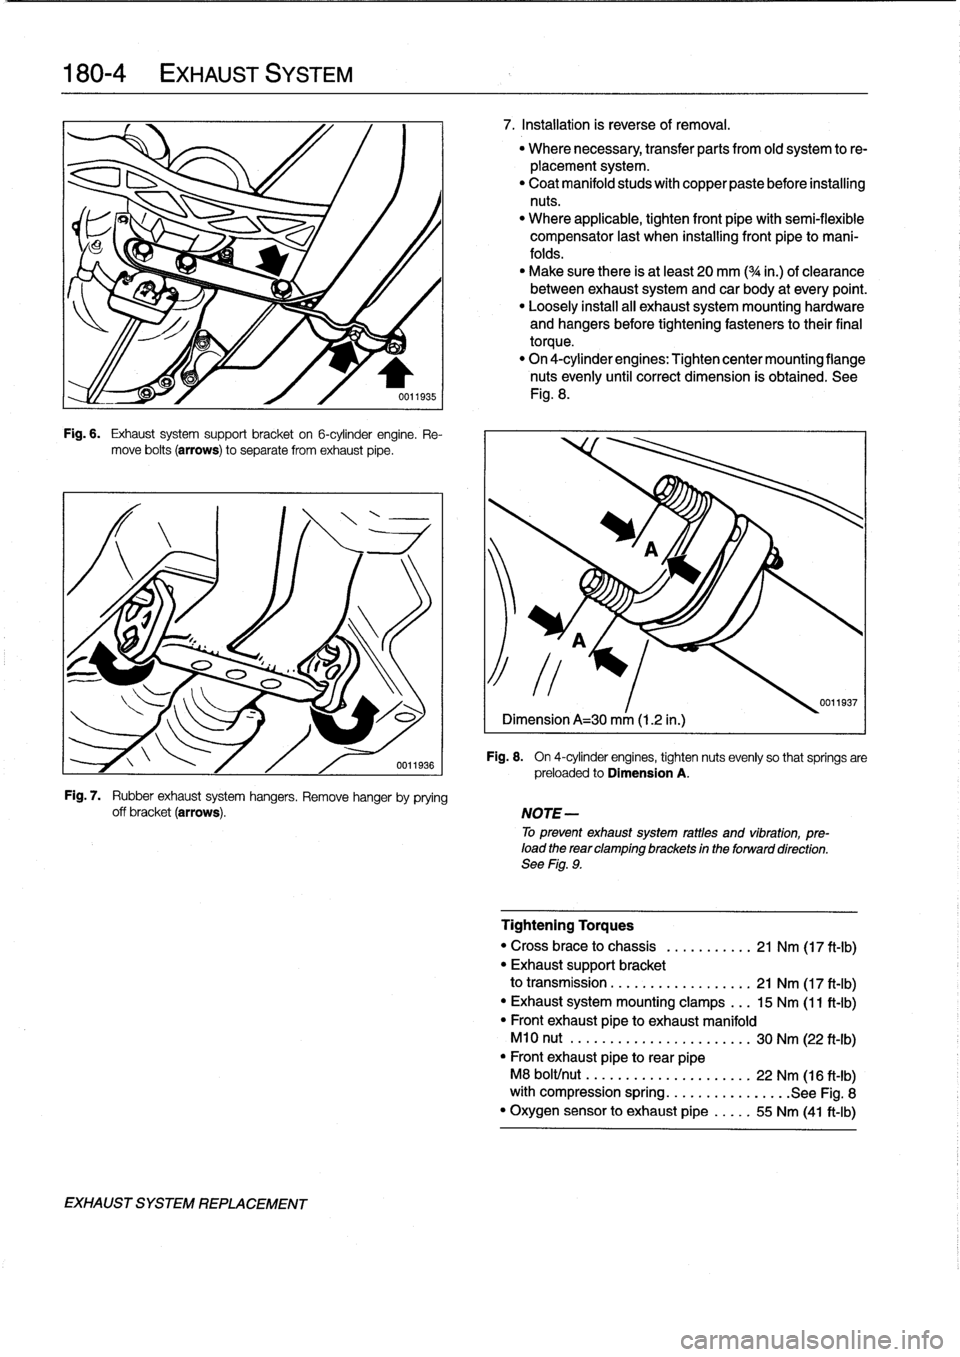 BMW 318i 1997 E36 User Guide 
180-
4

	

EXHAUST
SYSTEM

Fig
.
6
.

	

Exhaust
system
support
bracket
on
6-cylinder
engine
.
Re-
move
bolts
(arrows)
to
separate
from
exhaust
pipe
.

Fig
.
7
.

	

Rubber
exhaust
system
hangers
.
R